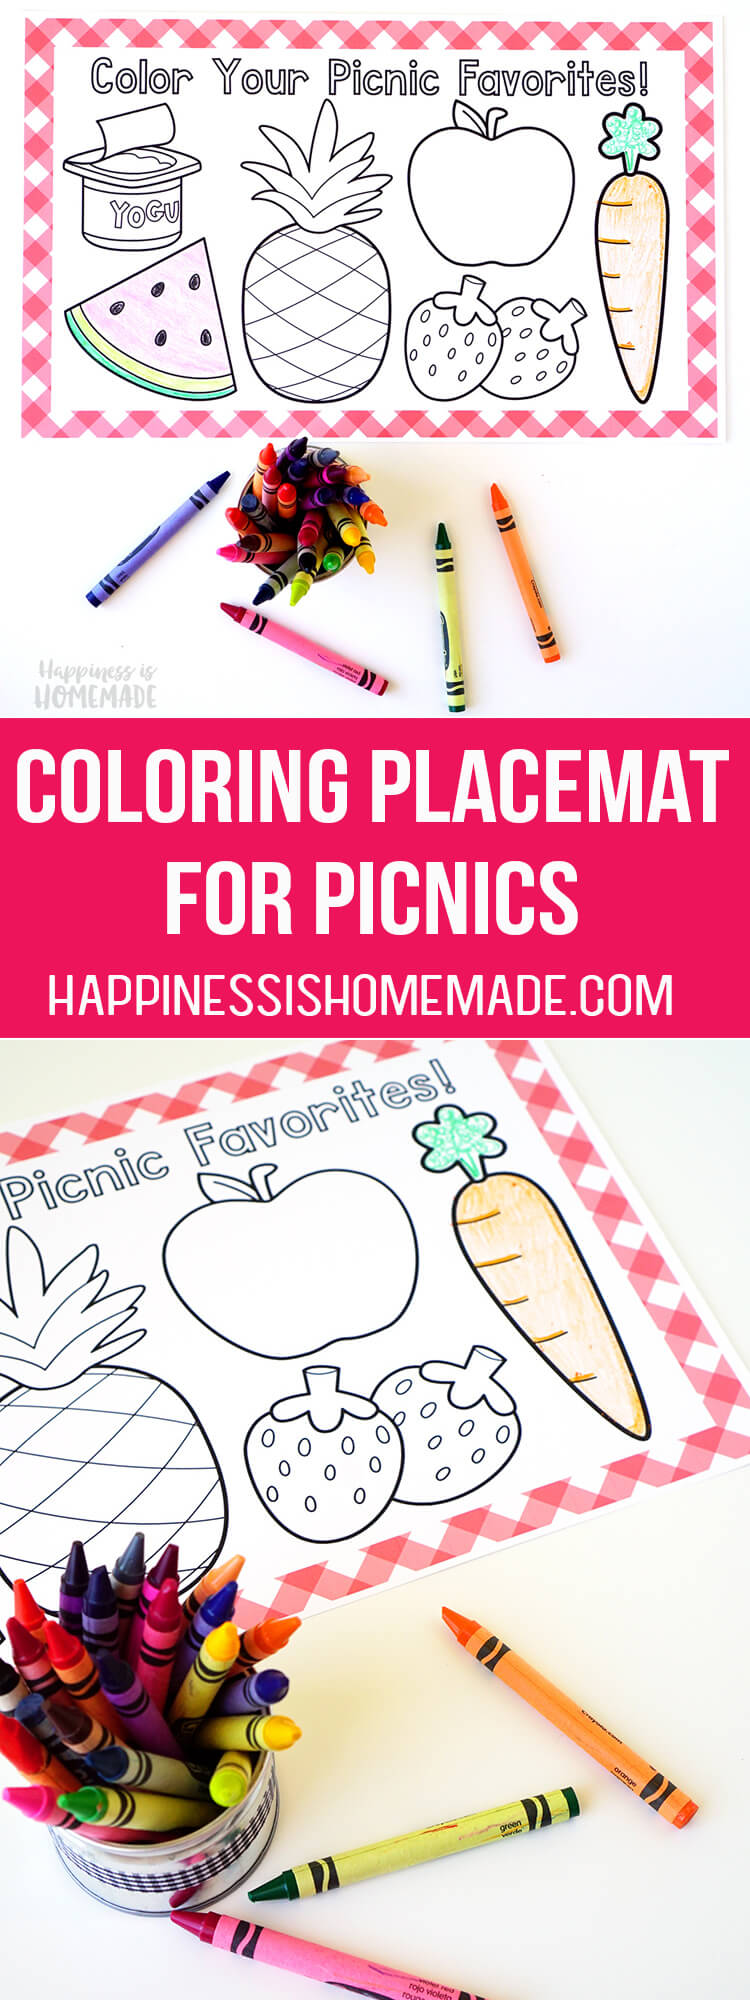 Coloring Placemat for Picnics